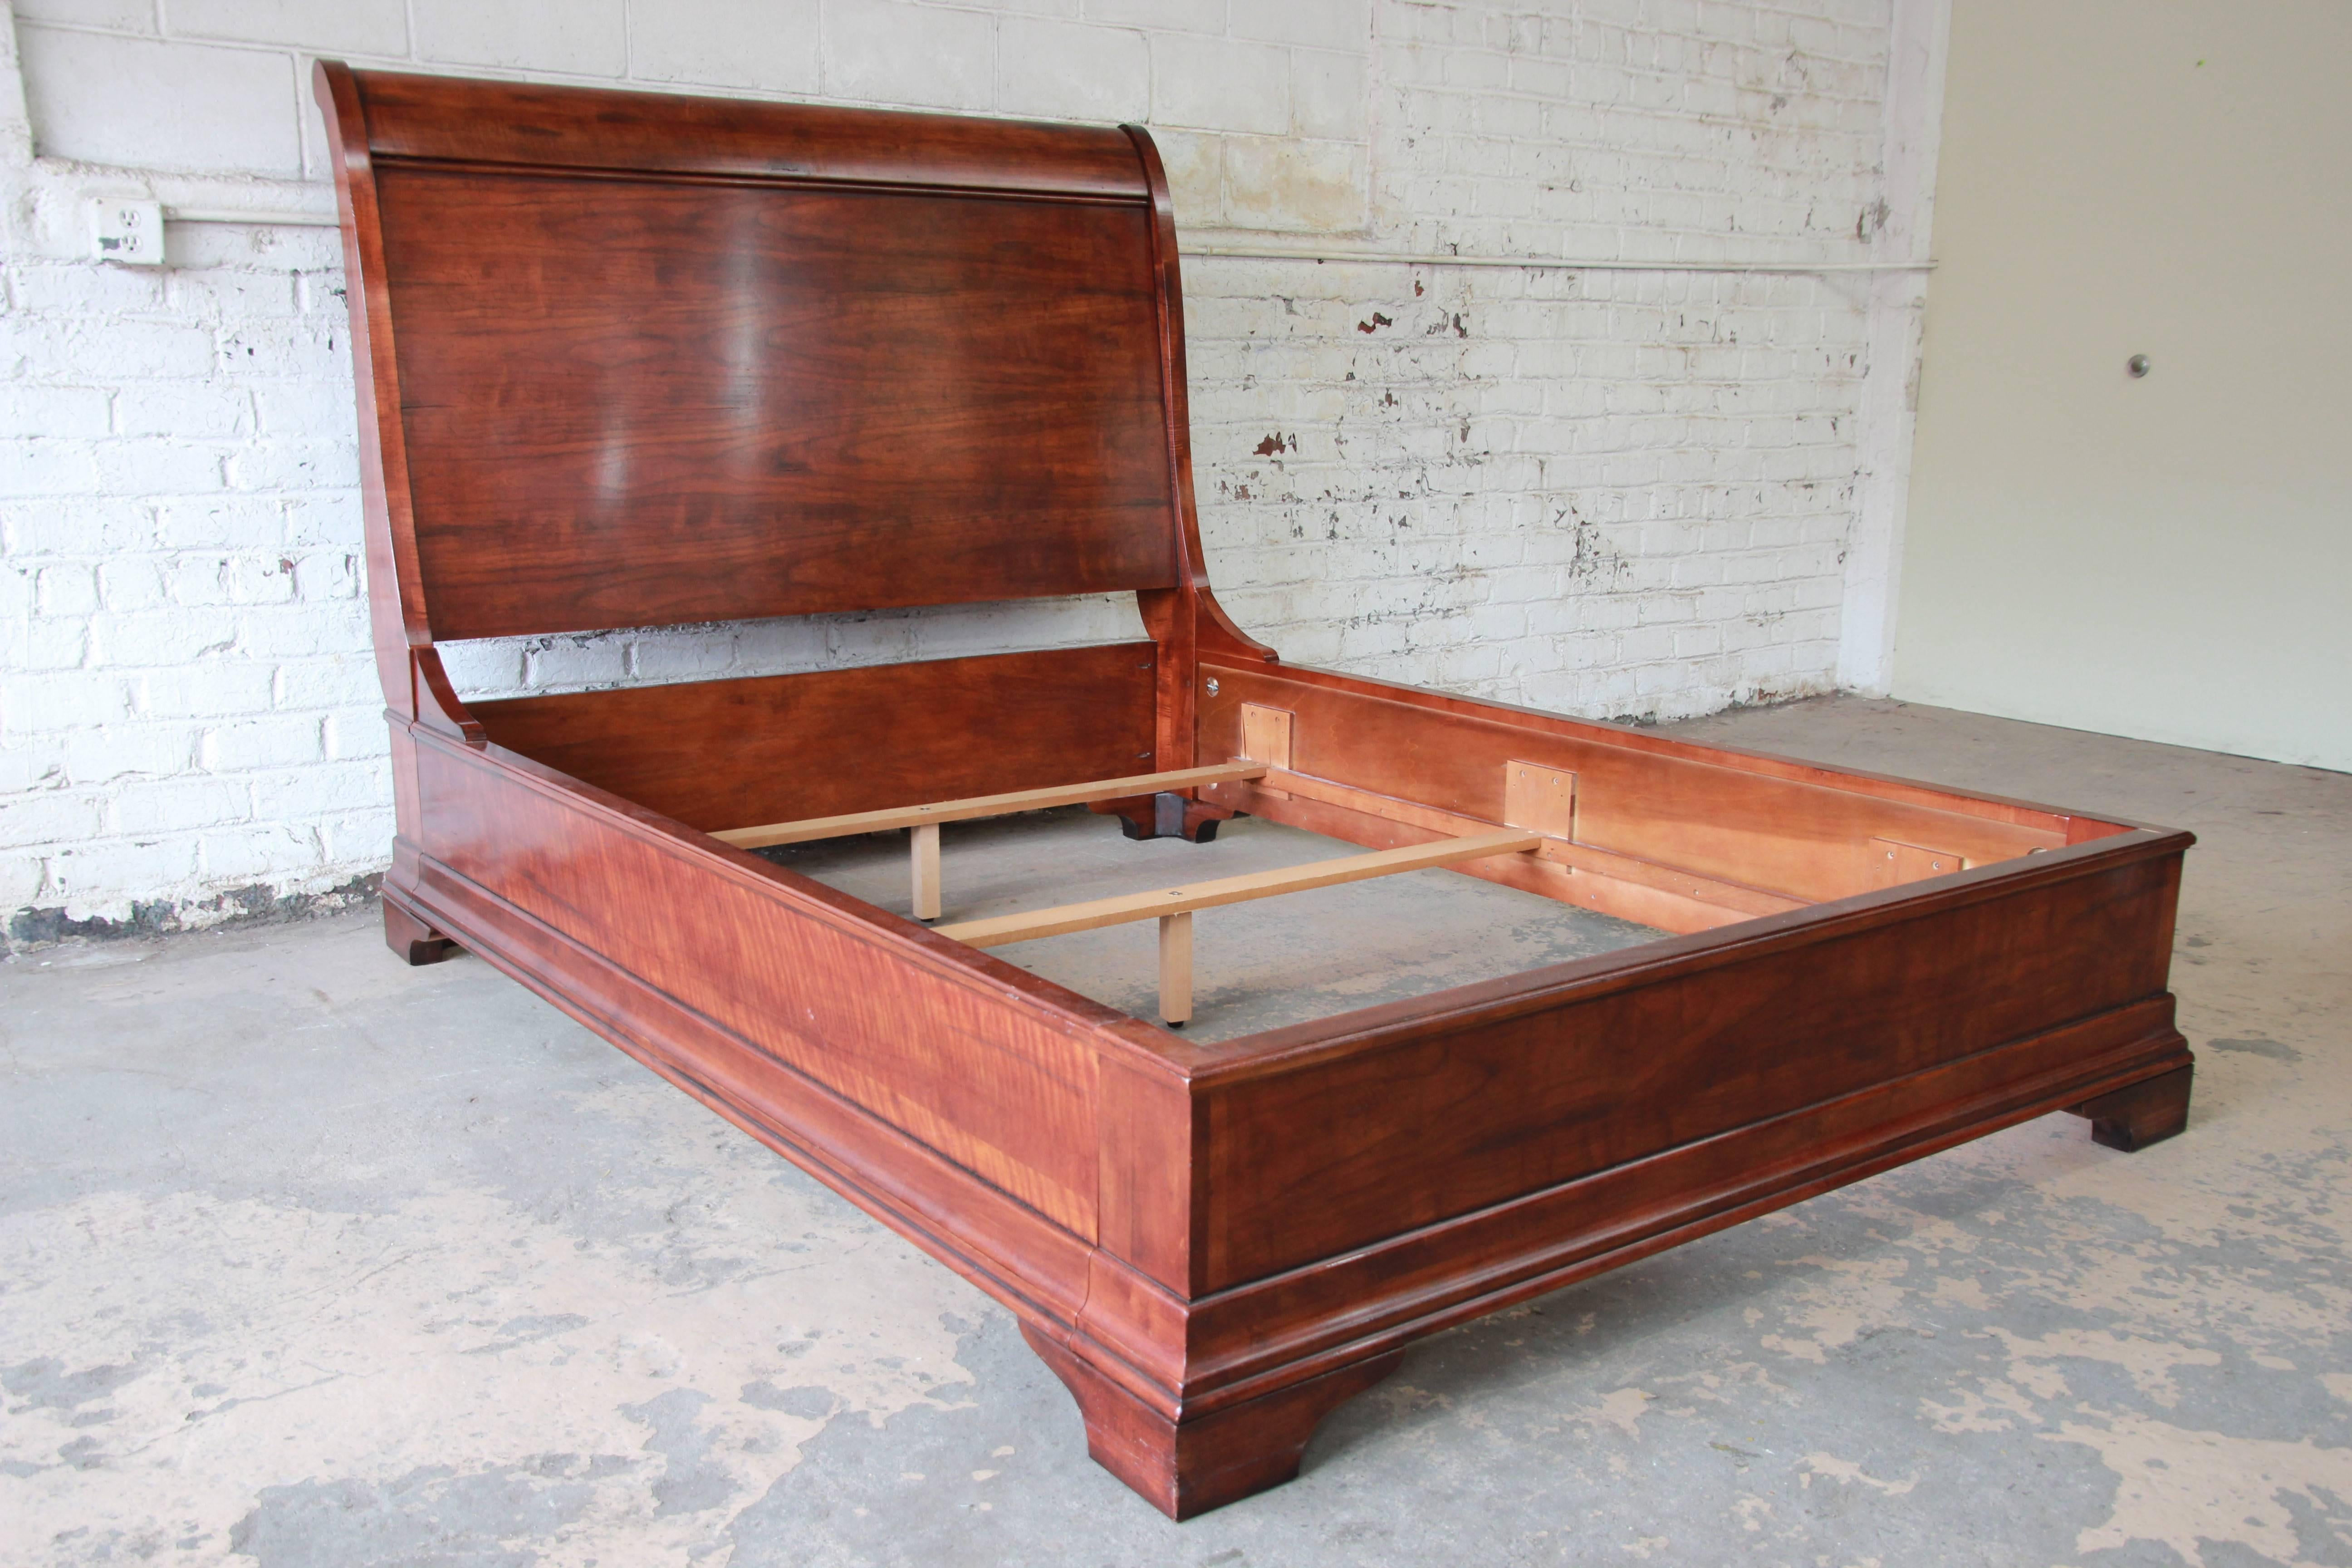 A gorgeous aged cherrywood queen-size bed frame by Henredon Fine Furniture. The bed frame features stunning wood grain and a nice traditional style. It is made with exceptional craftsmanship from solid cherry wood. Original Henredon label is